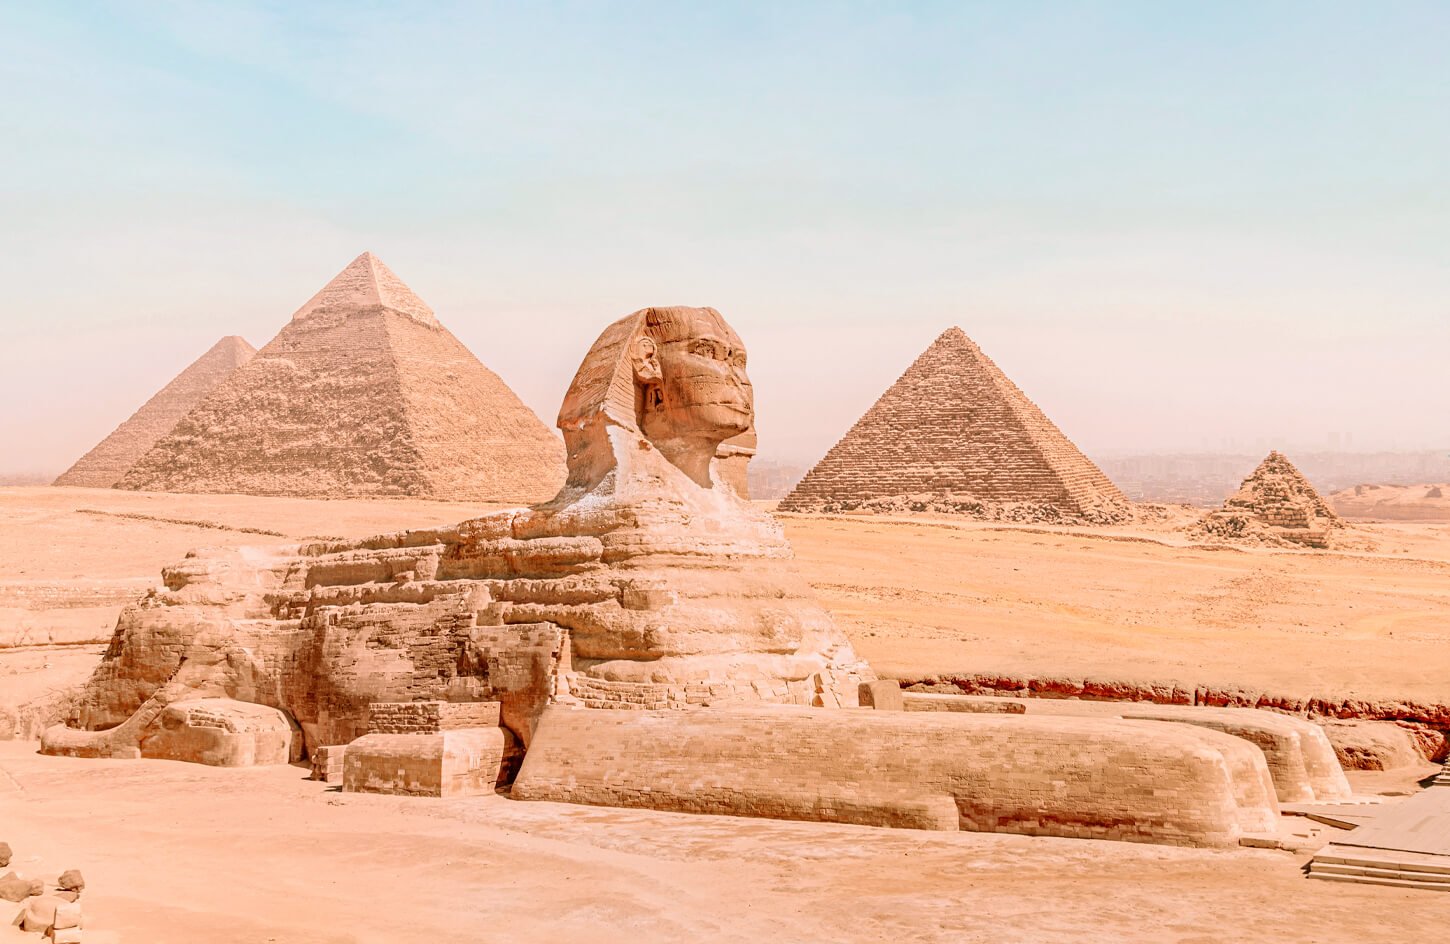 Wonderful-pictures-of-the-pyramids-of-Giza-and-the-Great-Sphinx-in-the-Giza-area